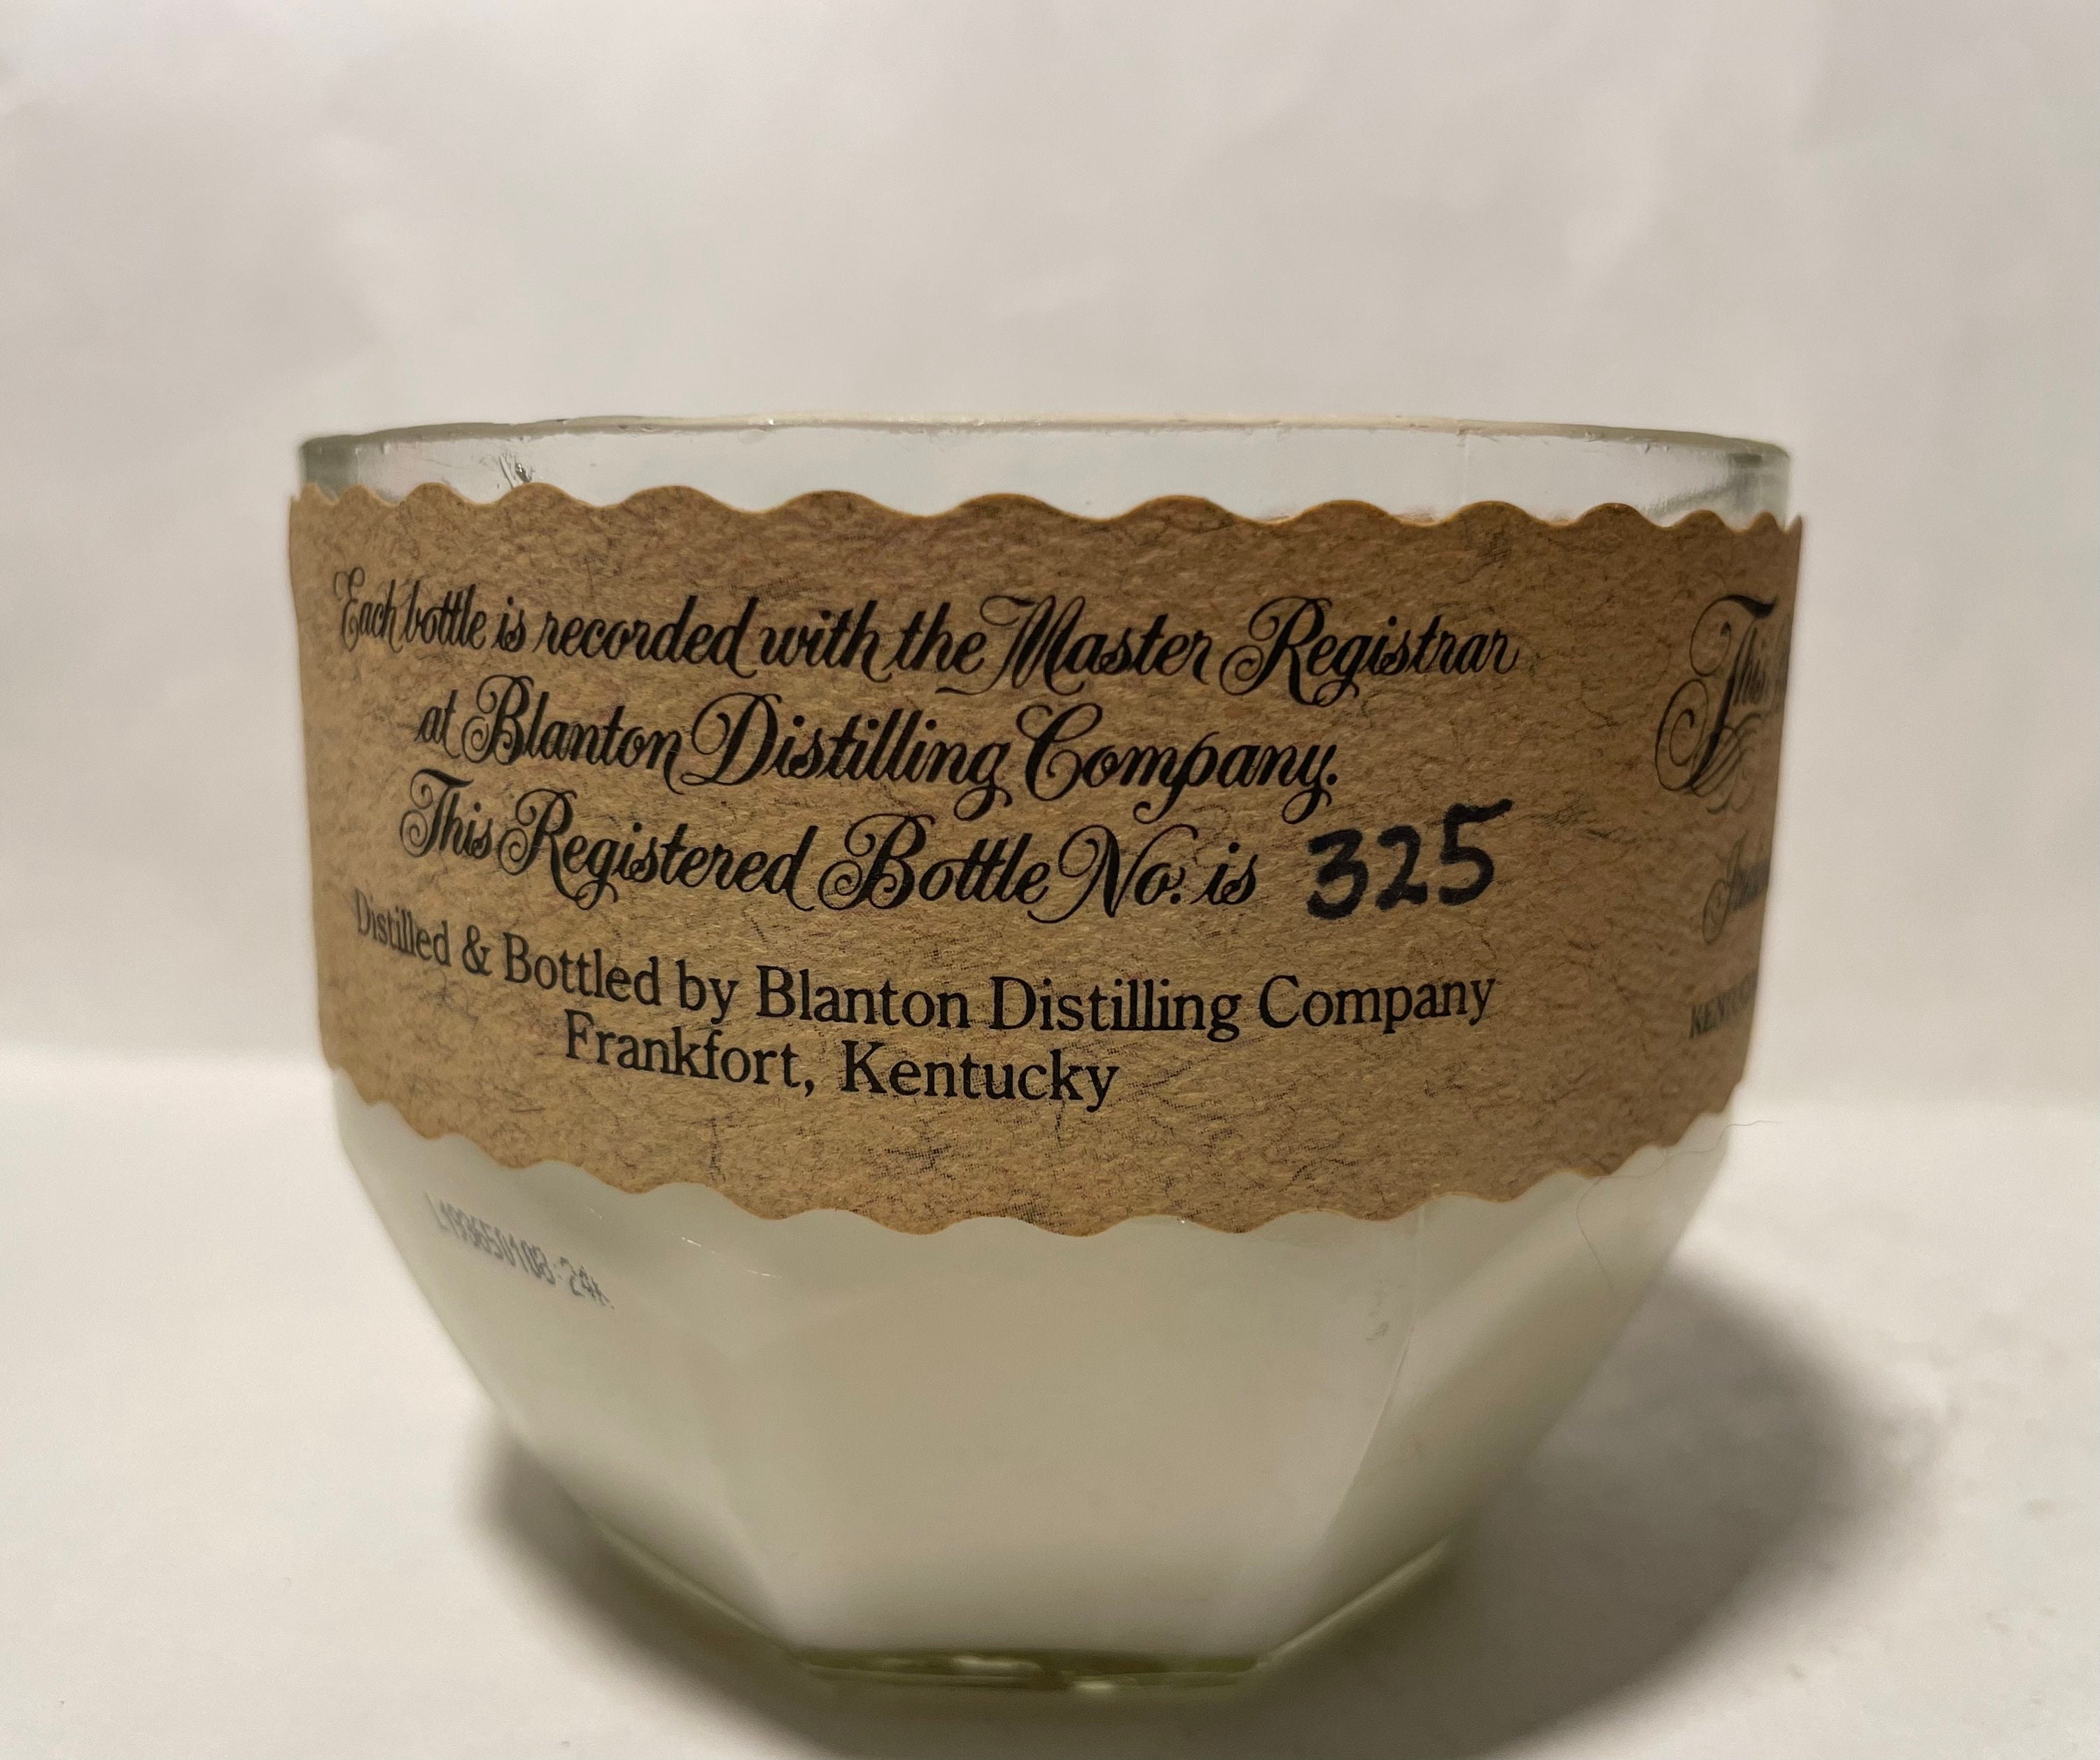 Wood Wick Candle  Kentucky Bourbon – Crazy Goat Lady Soap Company